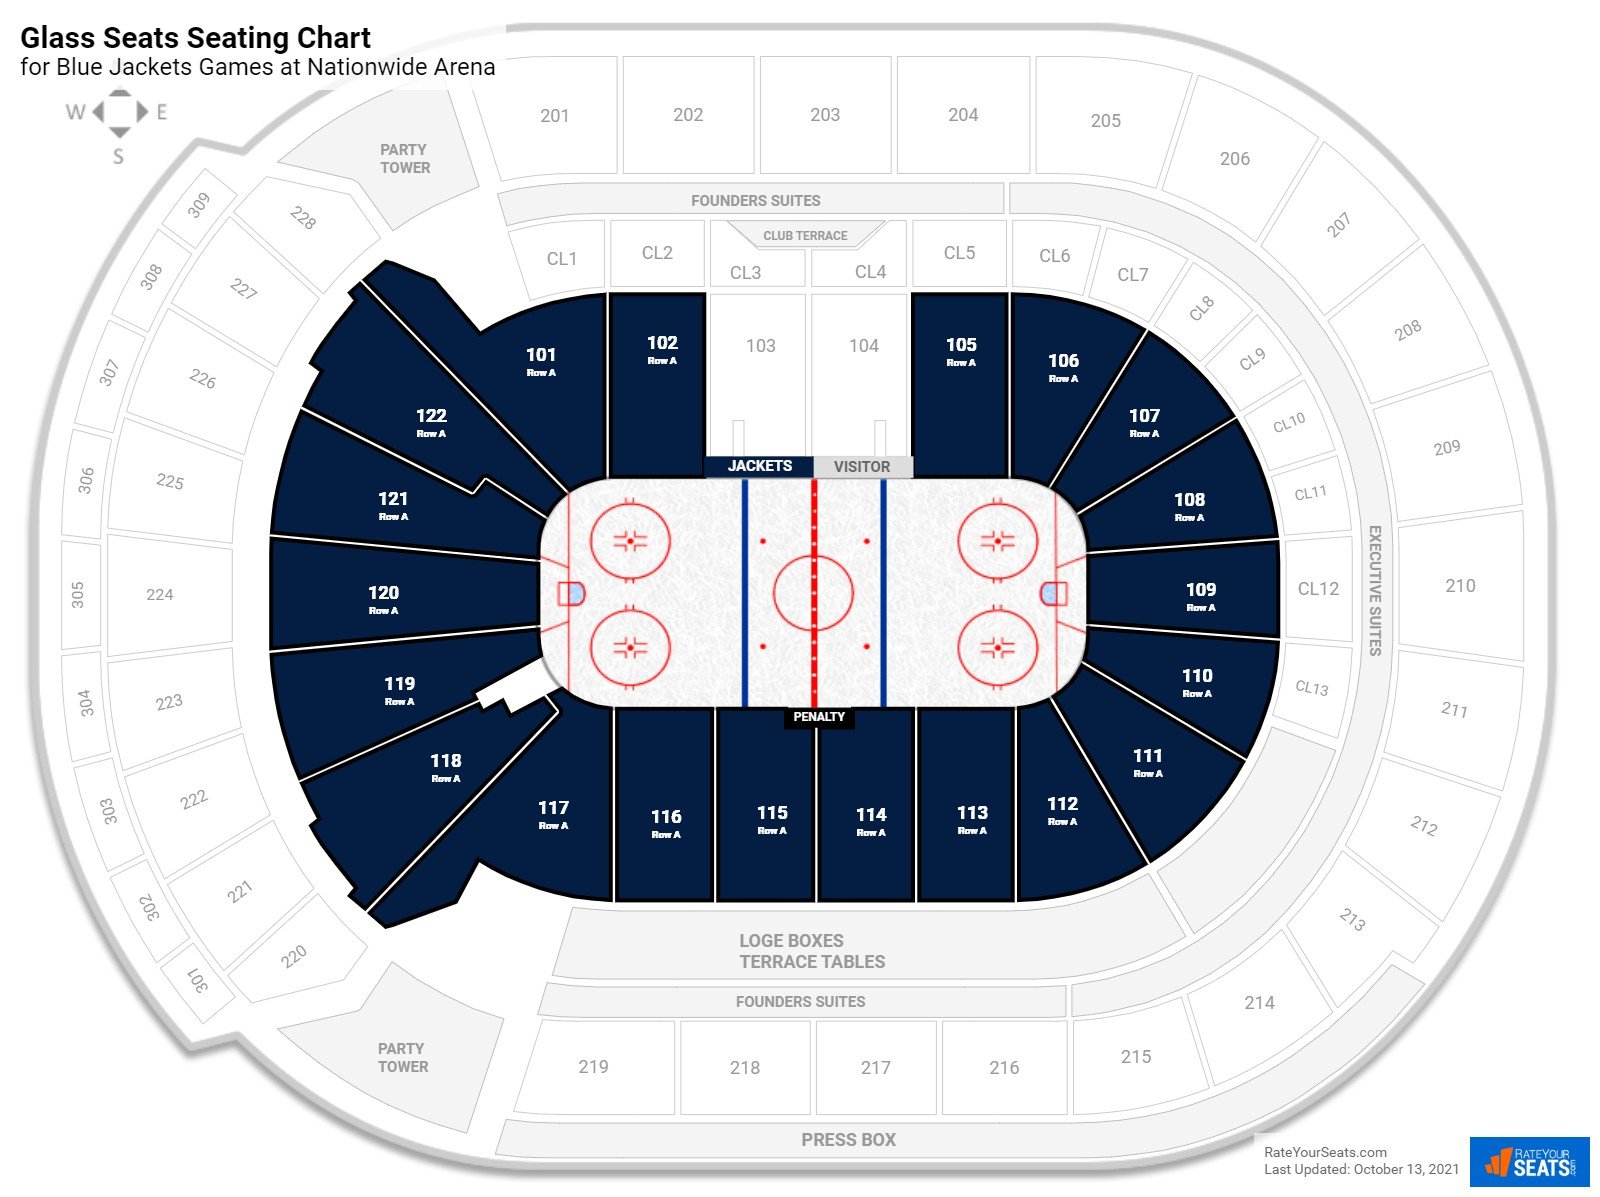 Blue Jackets Glass Seats Seating Chart at Nationwide Arena